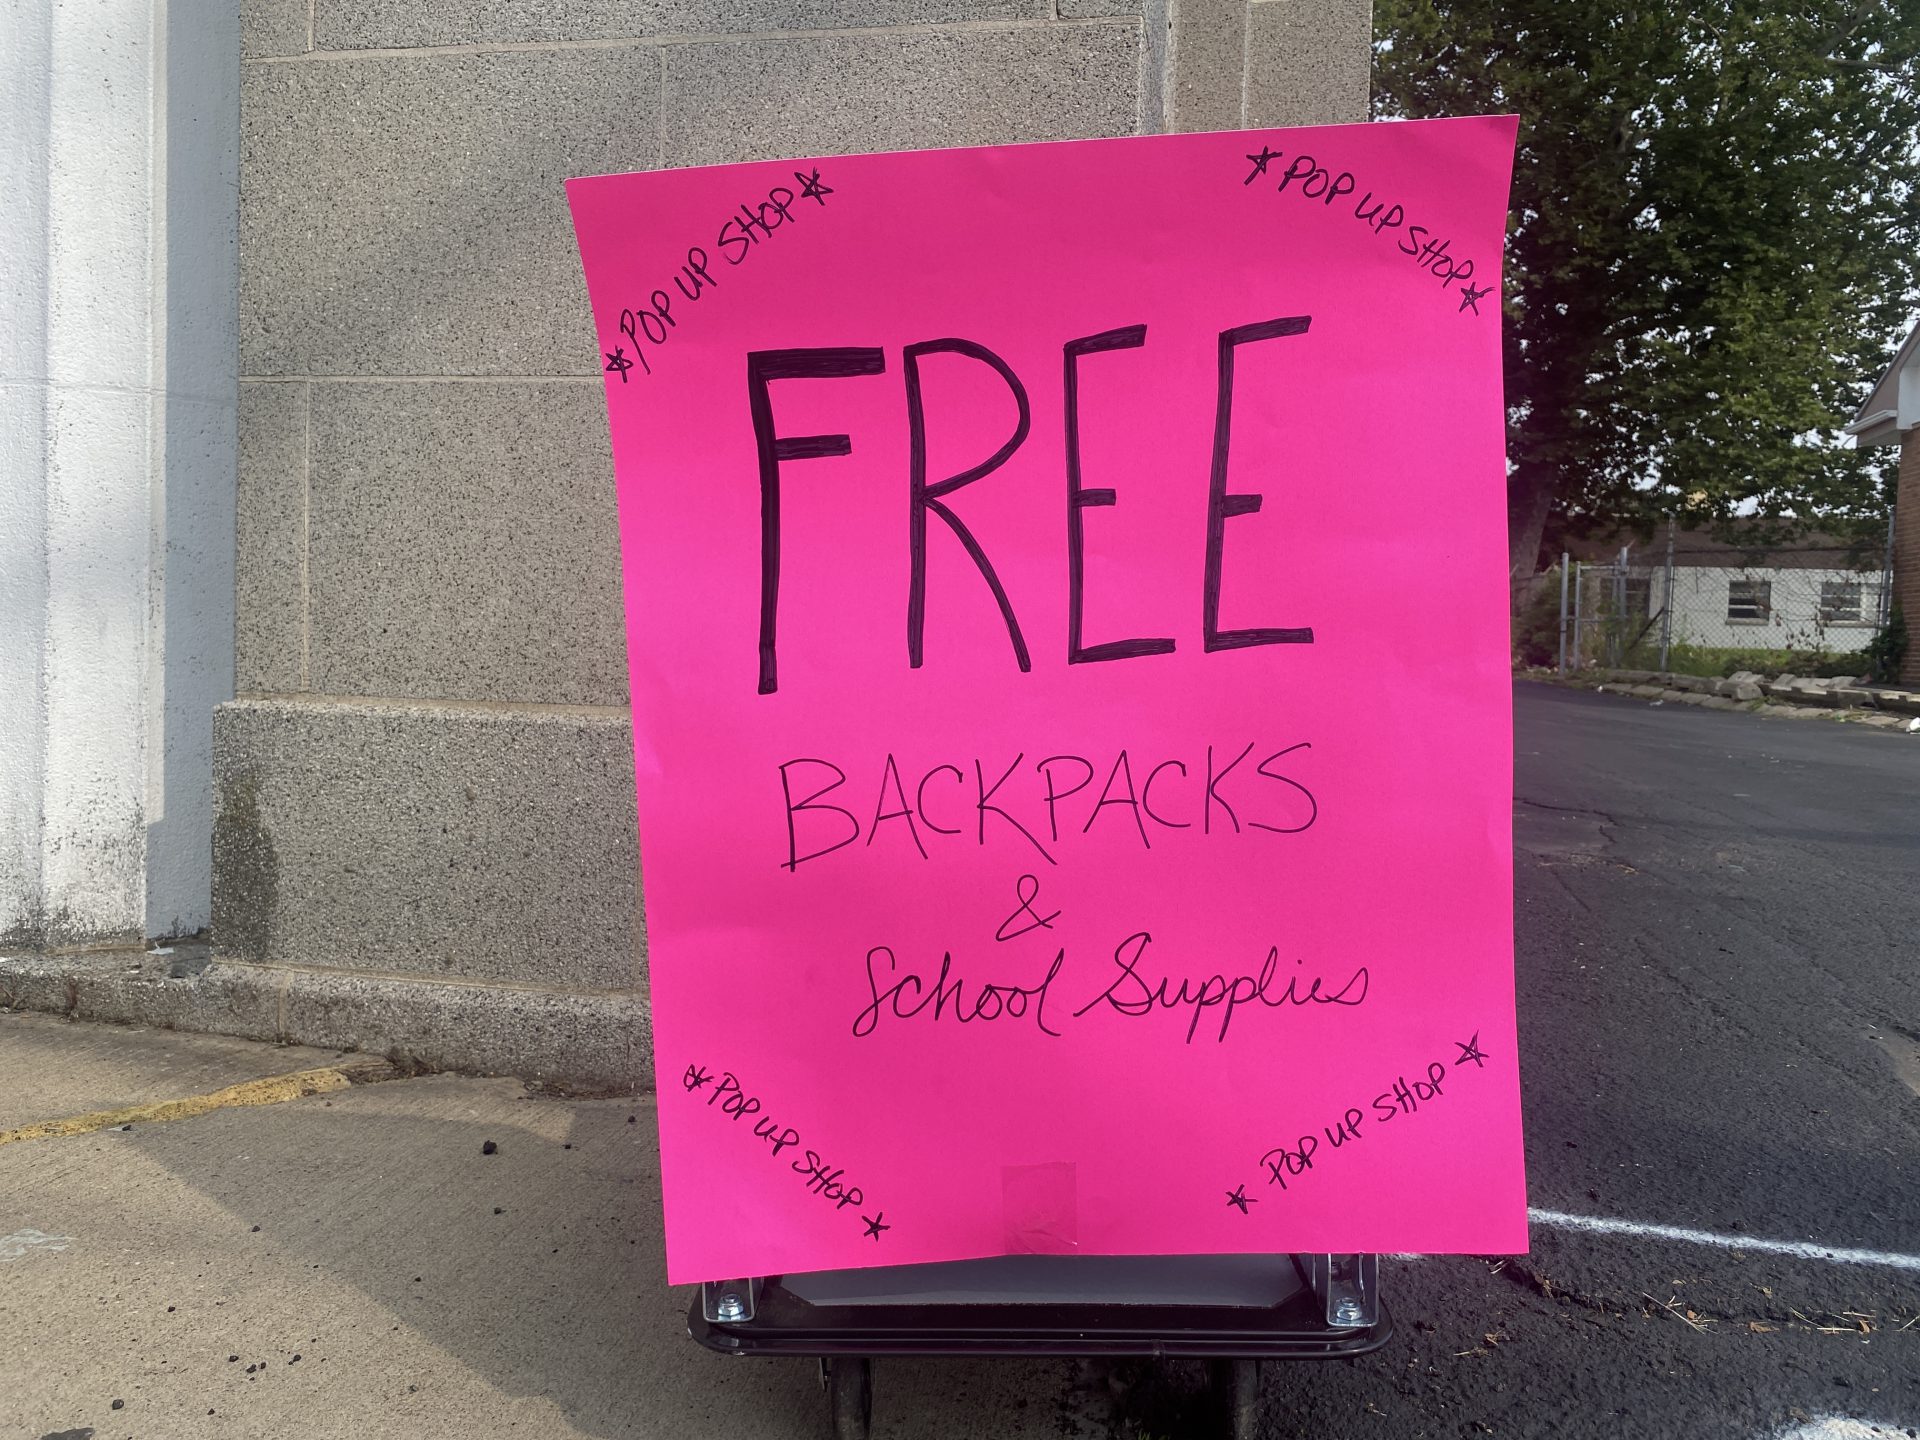 Hot pink sign with the word "free" in all caps to emphasize free book bags.